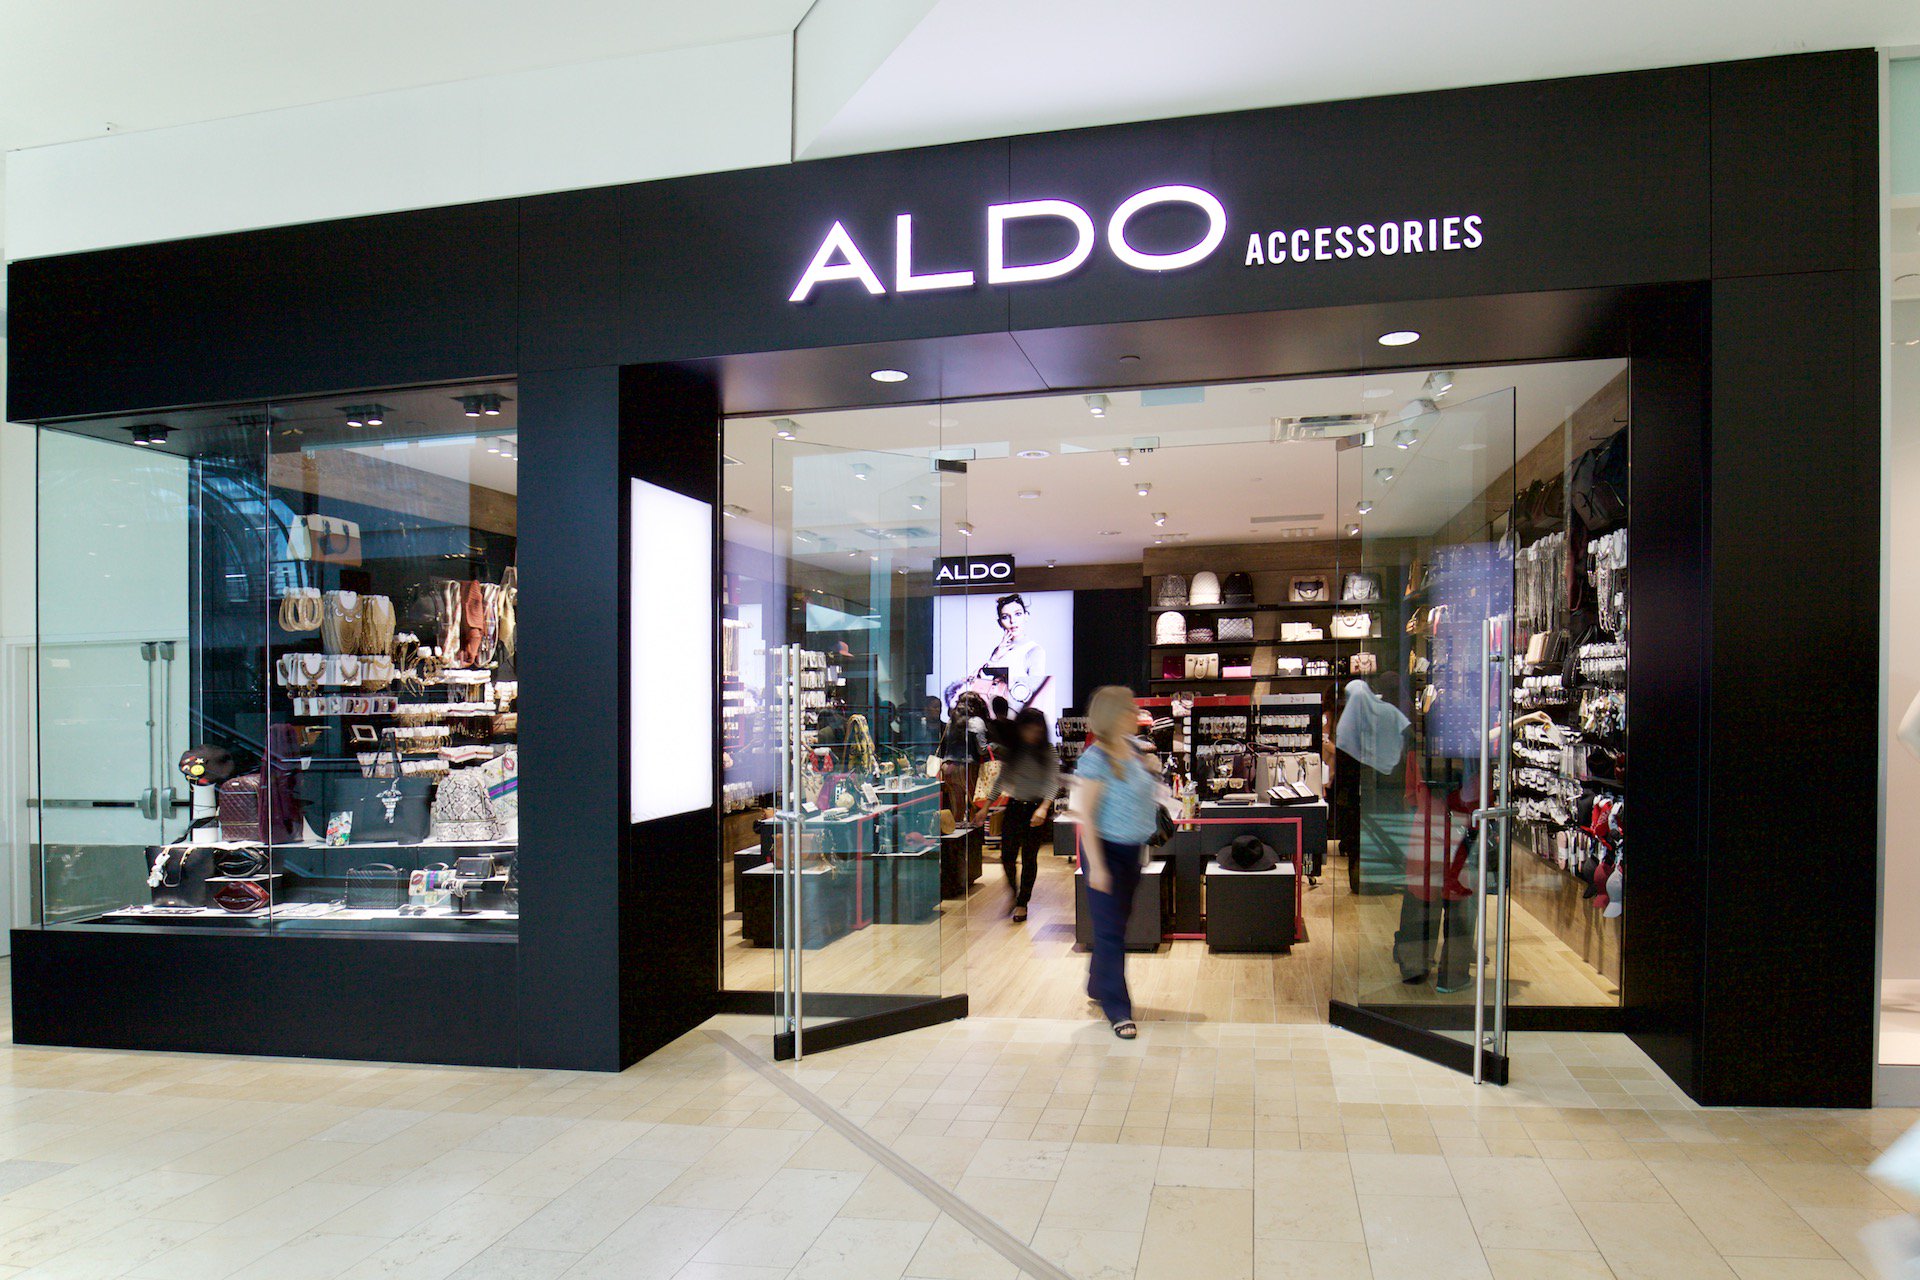 Stavning sofistikeret sympatisk SQUARE ONE on Twitter: "Newly renovated Aldo Accessories now open on Level  2, across from Ecco Shoes. @ALDO_Shoes https://t.co/mWG5IpKiV1  https://t.co/r6r1NYJLTe" / Twitter